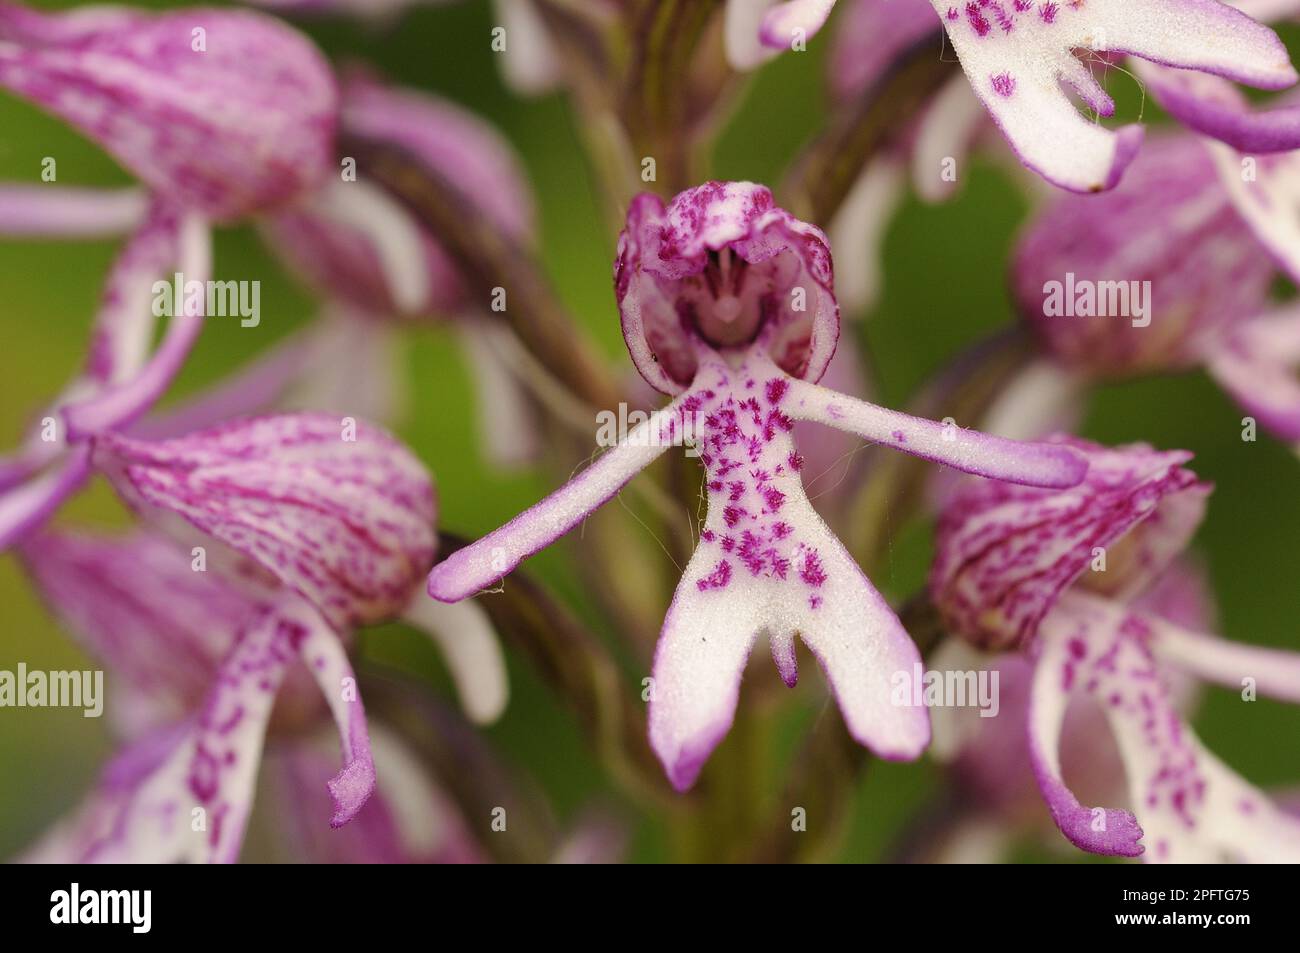 Lady Orchid Orchis purpurea x Monkey Orchid (Orchis simia) hybrid, close-up of flowers, Hartslock, Oxfordshire, England, United Kingdom Stock Photo